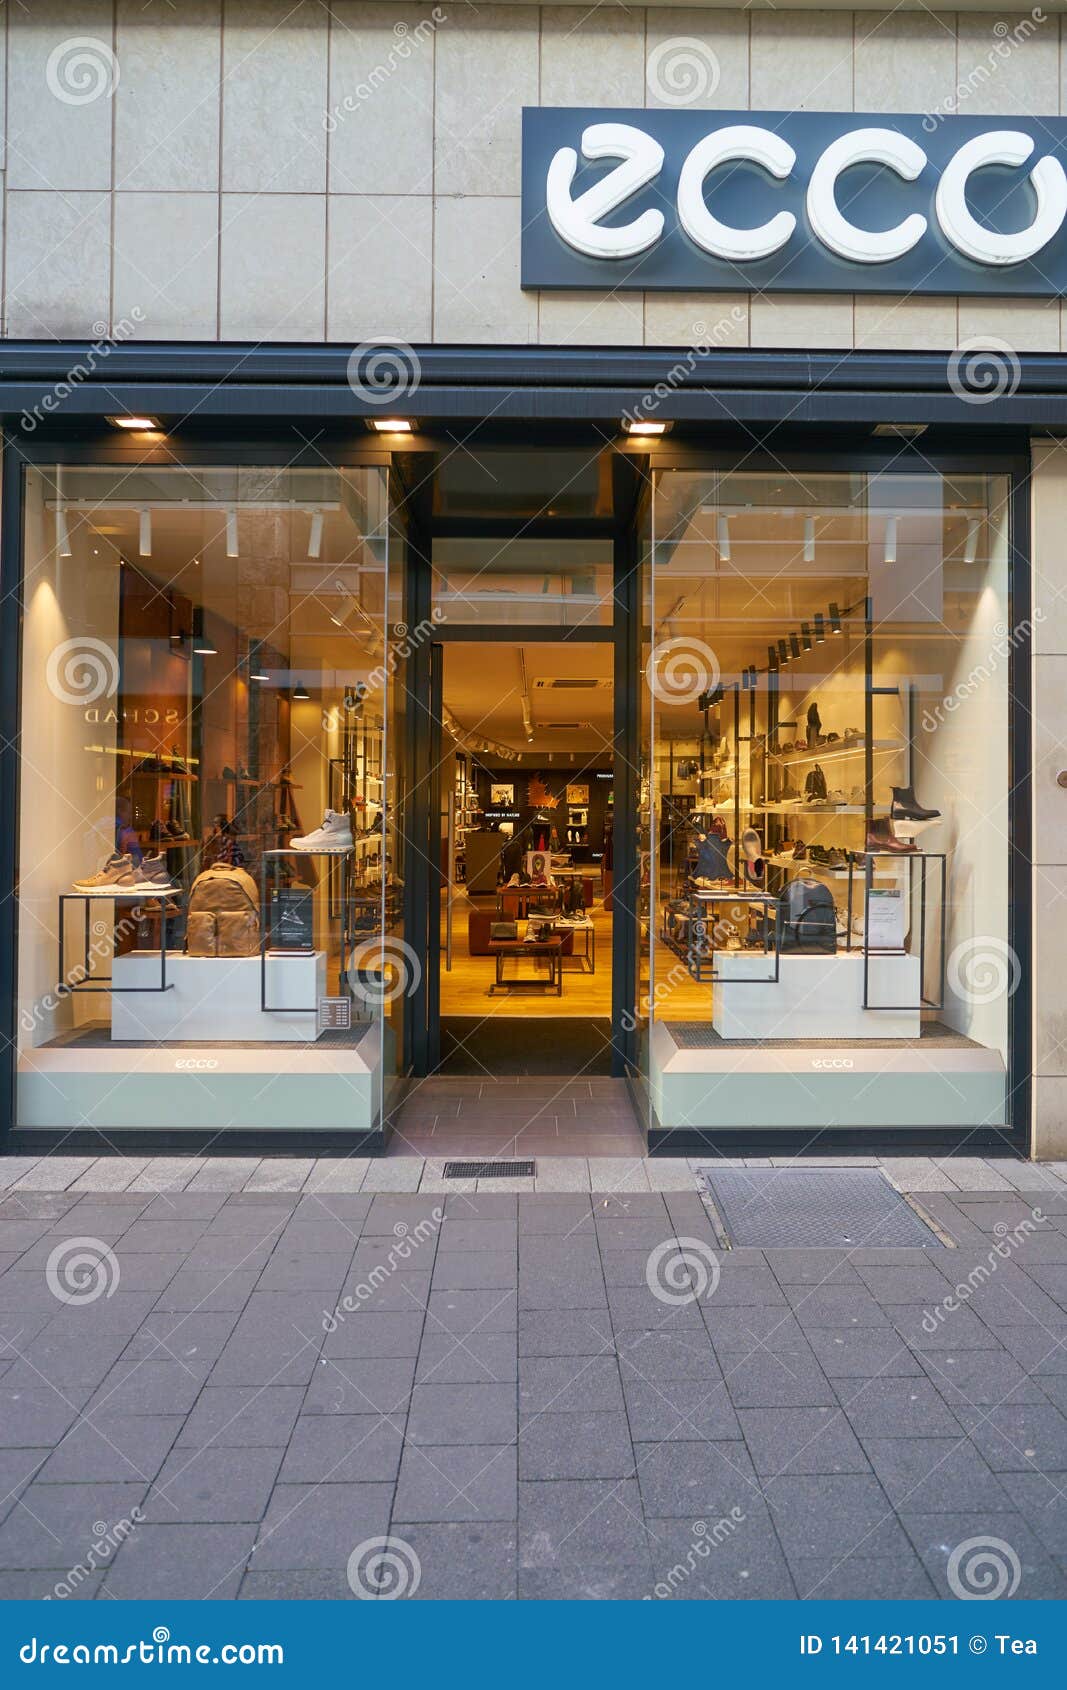 ulykke At interagere Øl Ecco Shop Photos - Free & Royalty-Free Stock Photos from Dreamstime